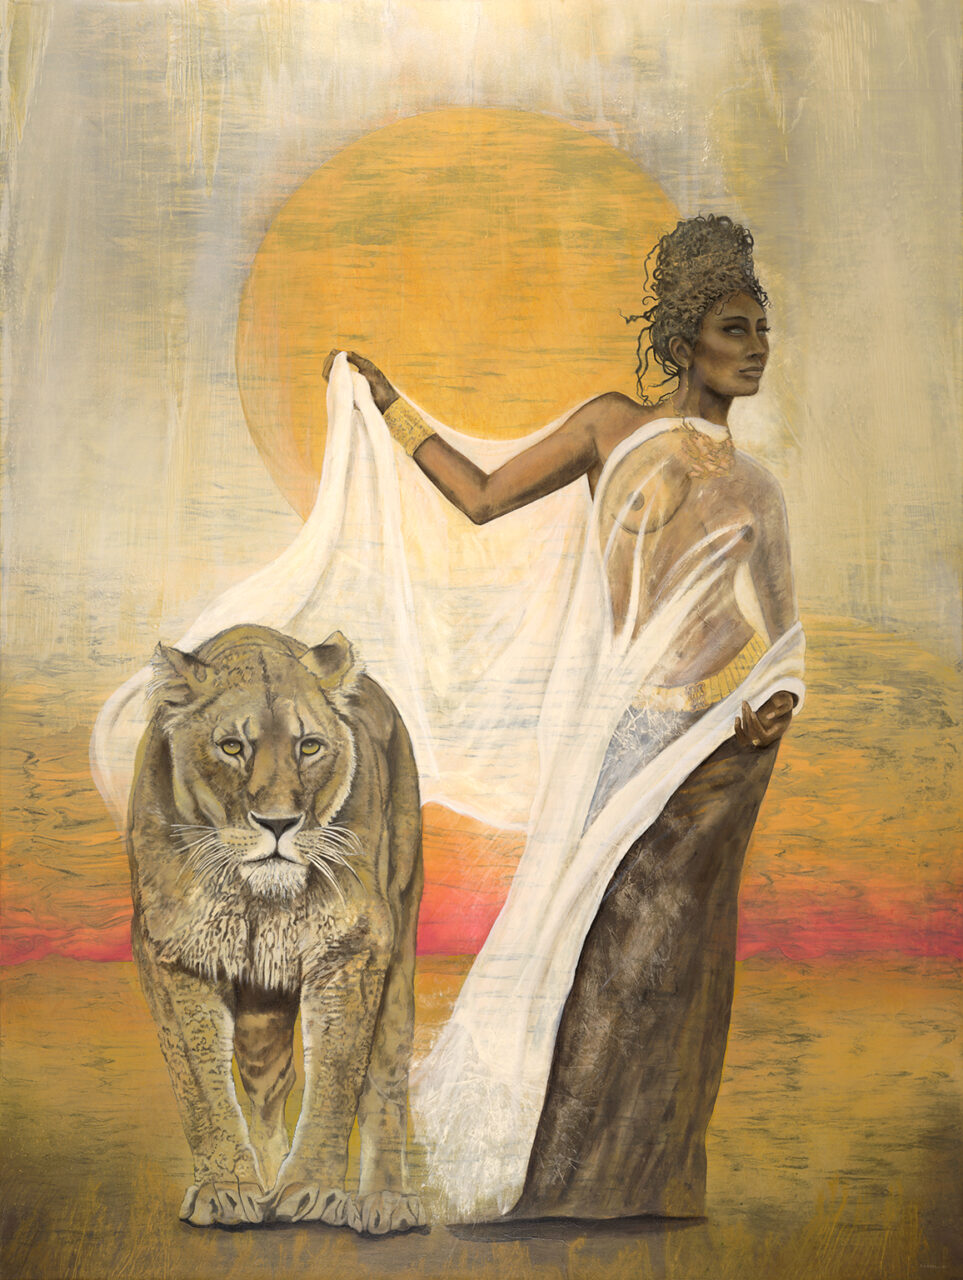 Lioness 96" x 72" rice paper, earth pigments, encaustic, oil on canvas